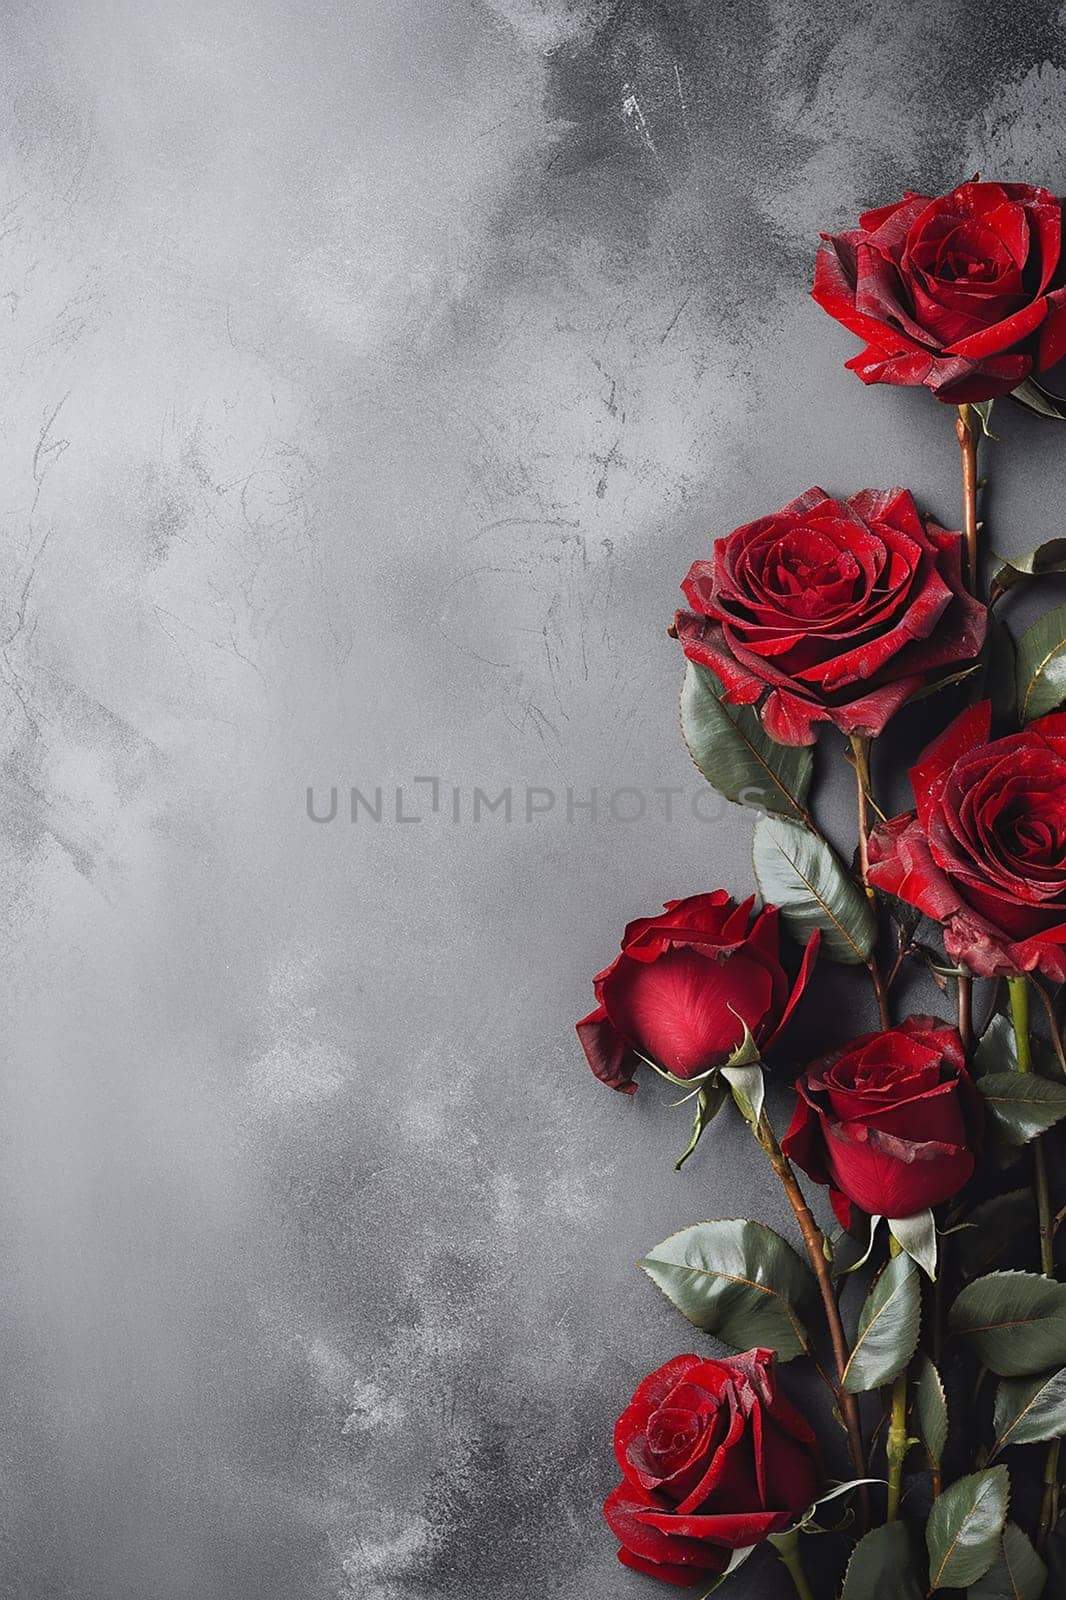 A group of red roses arranged on a grey background.